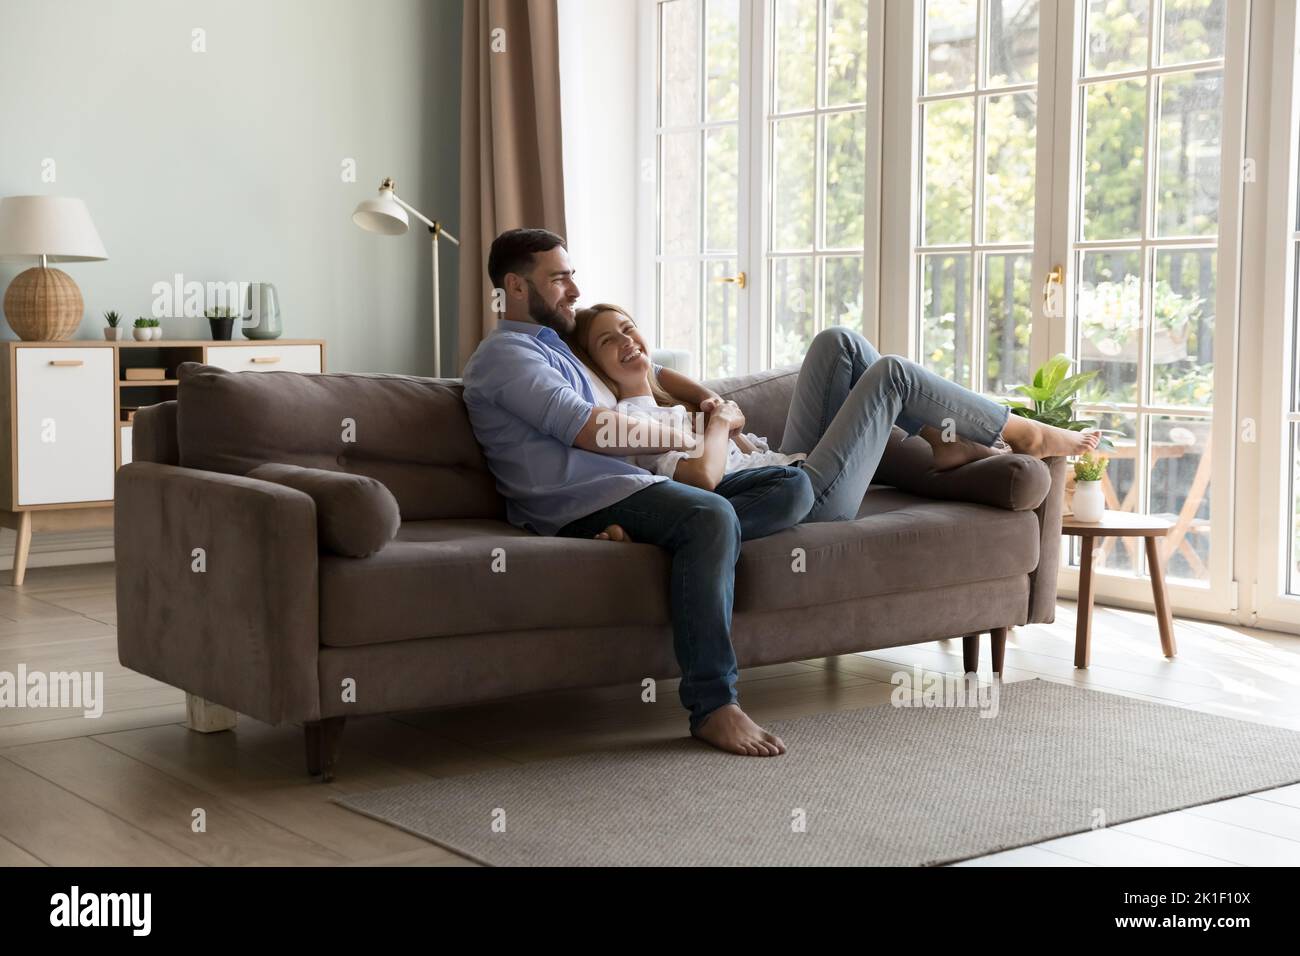 Happy young family couple relaxing on comfortable couch together Stock Photo